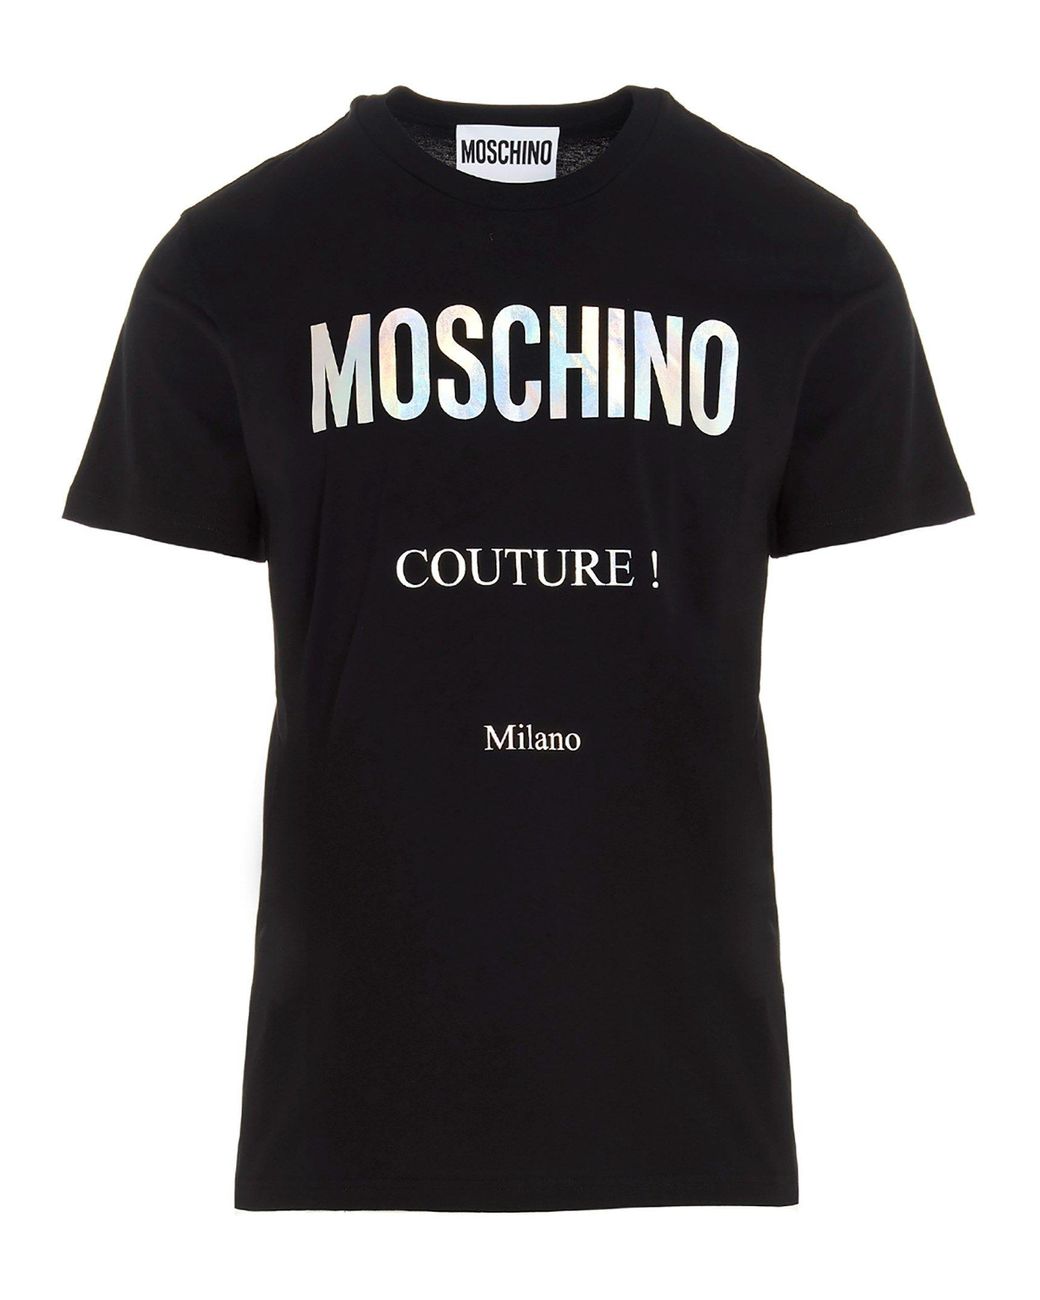 Moschino Cotton T-shirt in Black for Men - Save 55% - Lyst